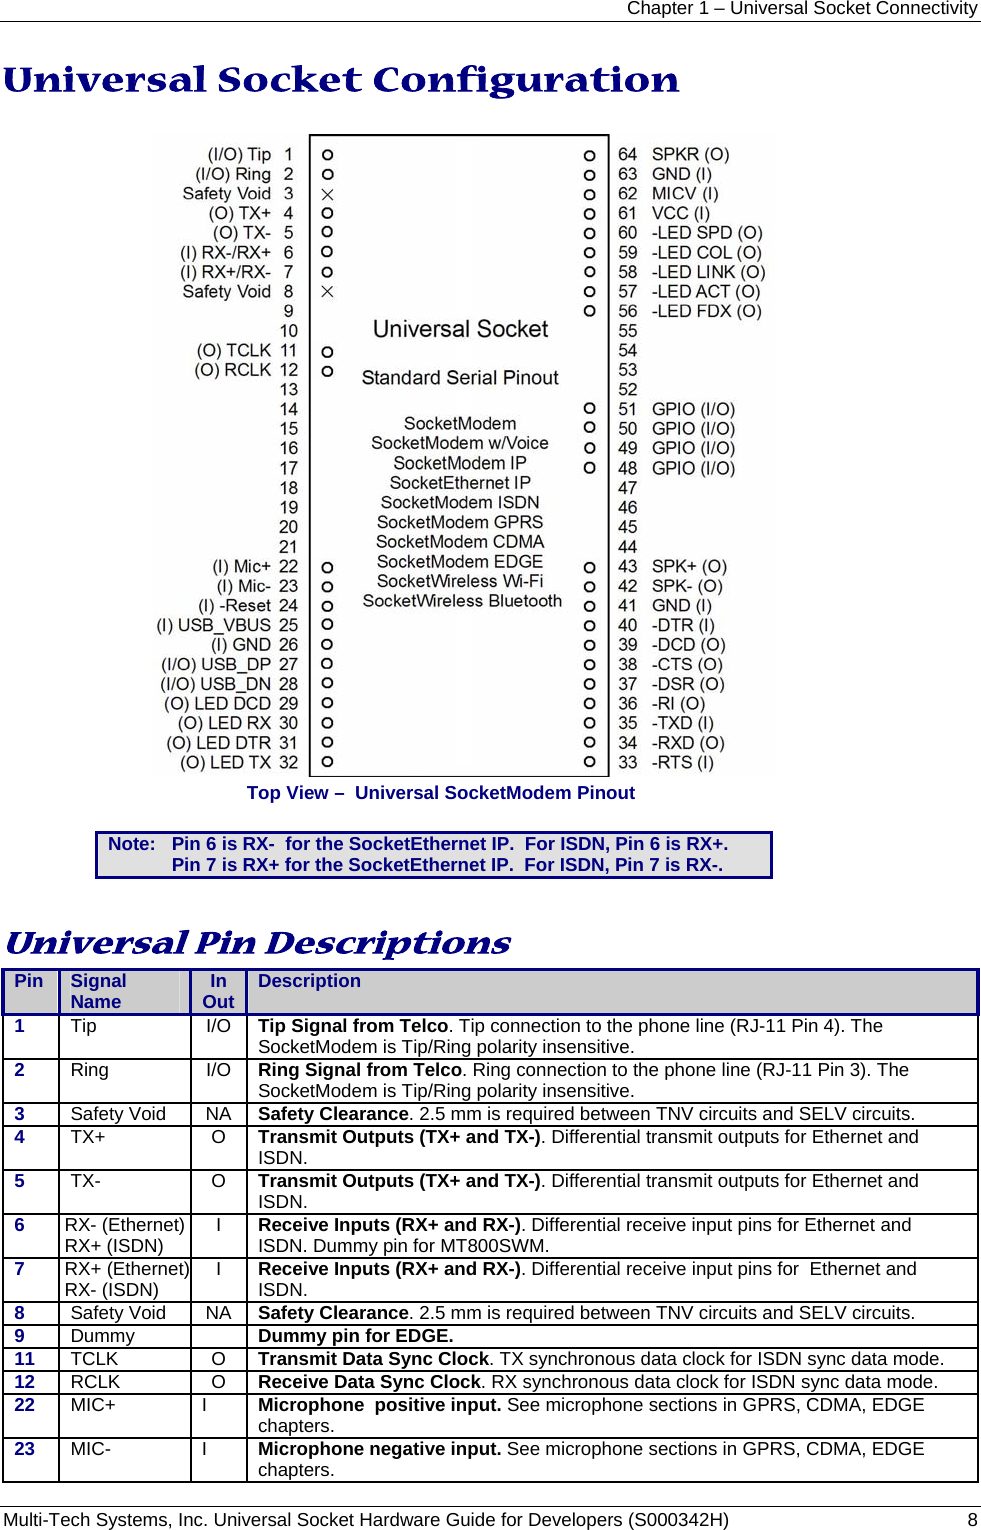 Chapter 1 – Universal Socket Connectivity Multi-Tech Systems, Inc. Universal Socket Hardware Guide for Developers (S000342H)  8  Universal Socket Configuration    Top View –  Universal SocketModem Pinout  Note:   Pin 6 is RX-  for the SocketEthernet IP.  For ISDN, Pin 6 is RX+. Pin 7 is RX+ for the SocketEthernet IP.  For ISDN, Pin 7 is RX-.   Universal Pin Descriptions Pin  Signal Name  In   Out   Description 1  Tip I/O Tip Signal from Telco. Tip connection to the phone line (RJ-11 Pin 4). The SocketModem is Tip/Ring polarity insensitive. 2  Ring I/O Ring Signal from Telco. Ring connection to the phone line (RJ-11 Pin 3). The SocketModem is Tip/Ring polarity insensitive. 3  Safety Void  NA  Safety Clearance. 2.5 mm is required between TNV circuits and SELV circuits. 4  TX+ O Transmit Outputs (TX+ and TX-). Differential transmit outputs for Ethernet and ISDN.  5  TX- O Transmit Outputs (TX+ and TX-). Differential transmit outputs for Ethernet and ISDN.  6  RX- (Ethernet) RX+ (ISDN)  I  Receive Inputs (RX+ and RX-). Differential receive input pins for Ethernet and ISDN. Dummy pin for MT800SWM. 7  RX+ (Ethernet)RX- (ISDN)  I  Receive Inputs (RX+ and RX-). Differential receive input pins for  Ethernet and ISDN. 8  Safety Void  NA  Safety Clearance. 2.5 mm is required between TNV circuits and SELV circuits. 9  Dummy  Dummy pin for EDGE. 11  TCLK O Transmit Data Sync Clock. TX synchronous data clock for ISDN sync data mode. 12  RCLK O Receive Data Sync Clock. RX synchronous data clock for ISDN sync data mode. 22  MIC+ I Microphone  positive input. See microphone sections in GPRS, CDMA, EDGE chapters. 23 MIC- I Microphone negative input. See microphone sections in GPRS, CDMA, EDGE chapters.  